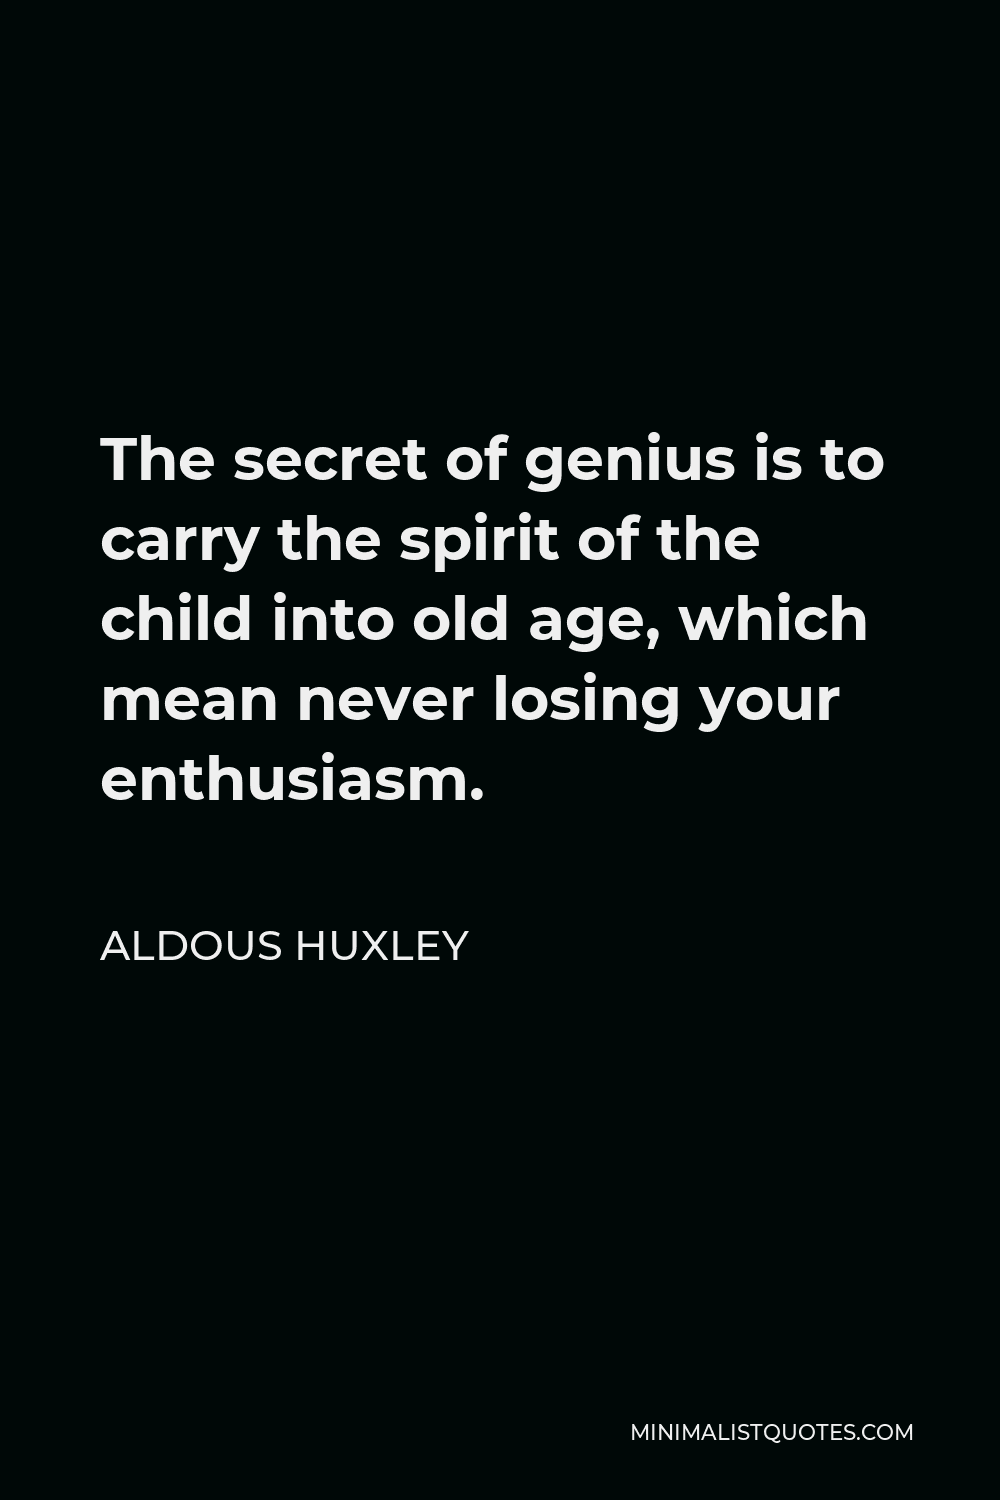 Aldous Huxley Quote - The secret of genius is to carry the spirit of the child into old age, which mean never losing your enthusiasm.